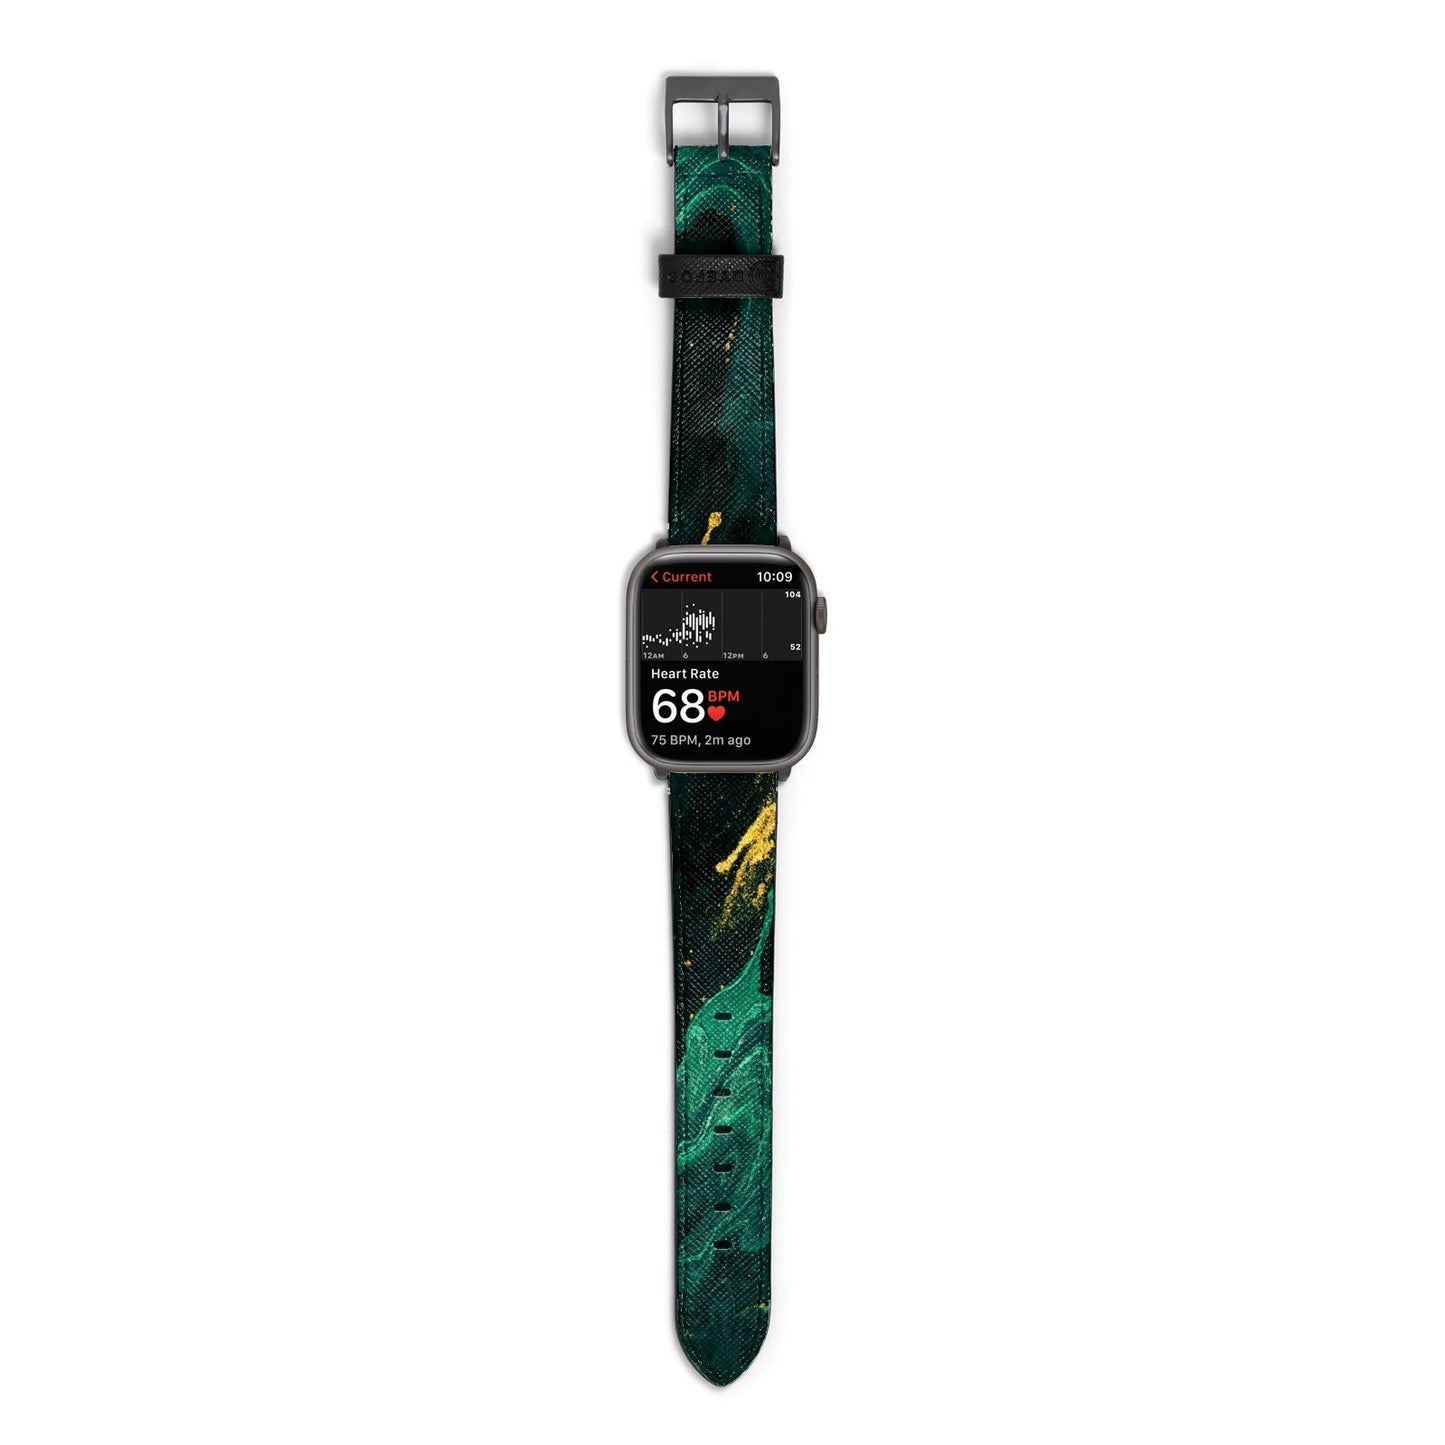 Emerald Green Apple Watch Strap Size 38mm with Space Grey Hardware